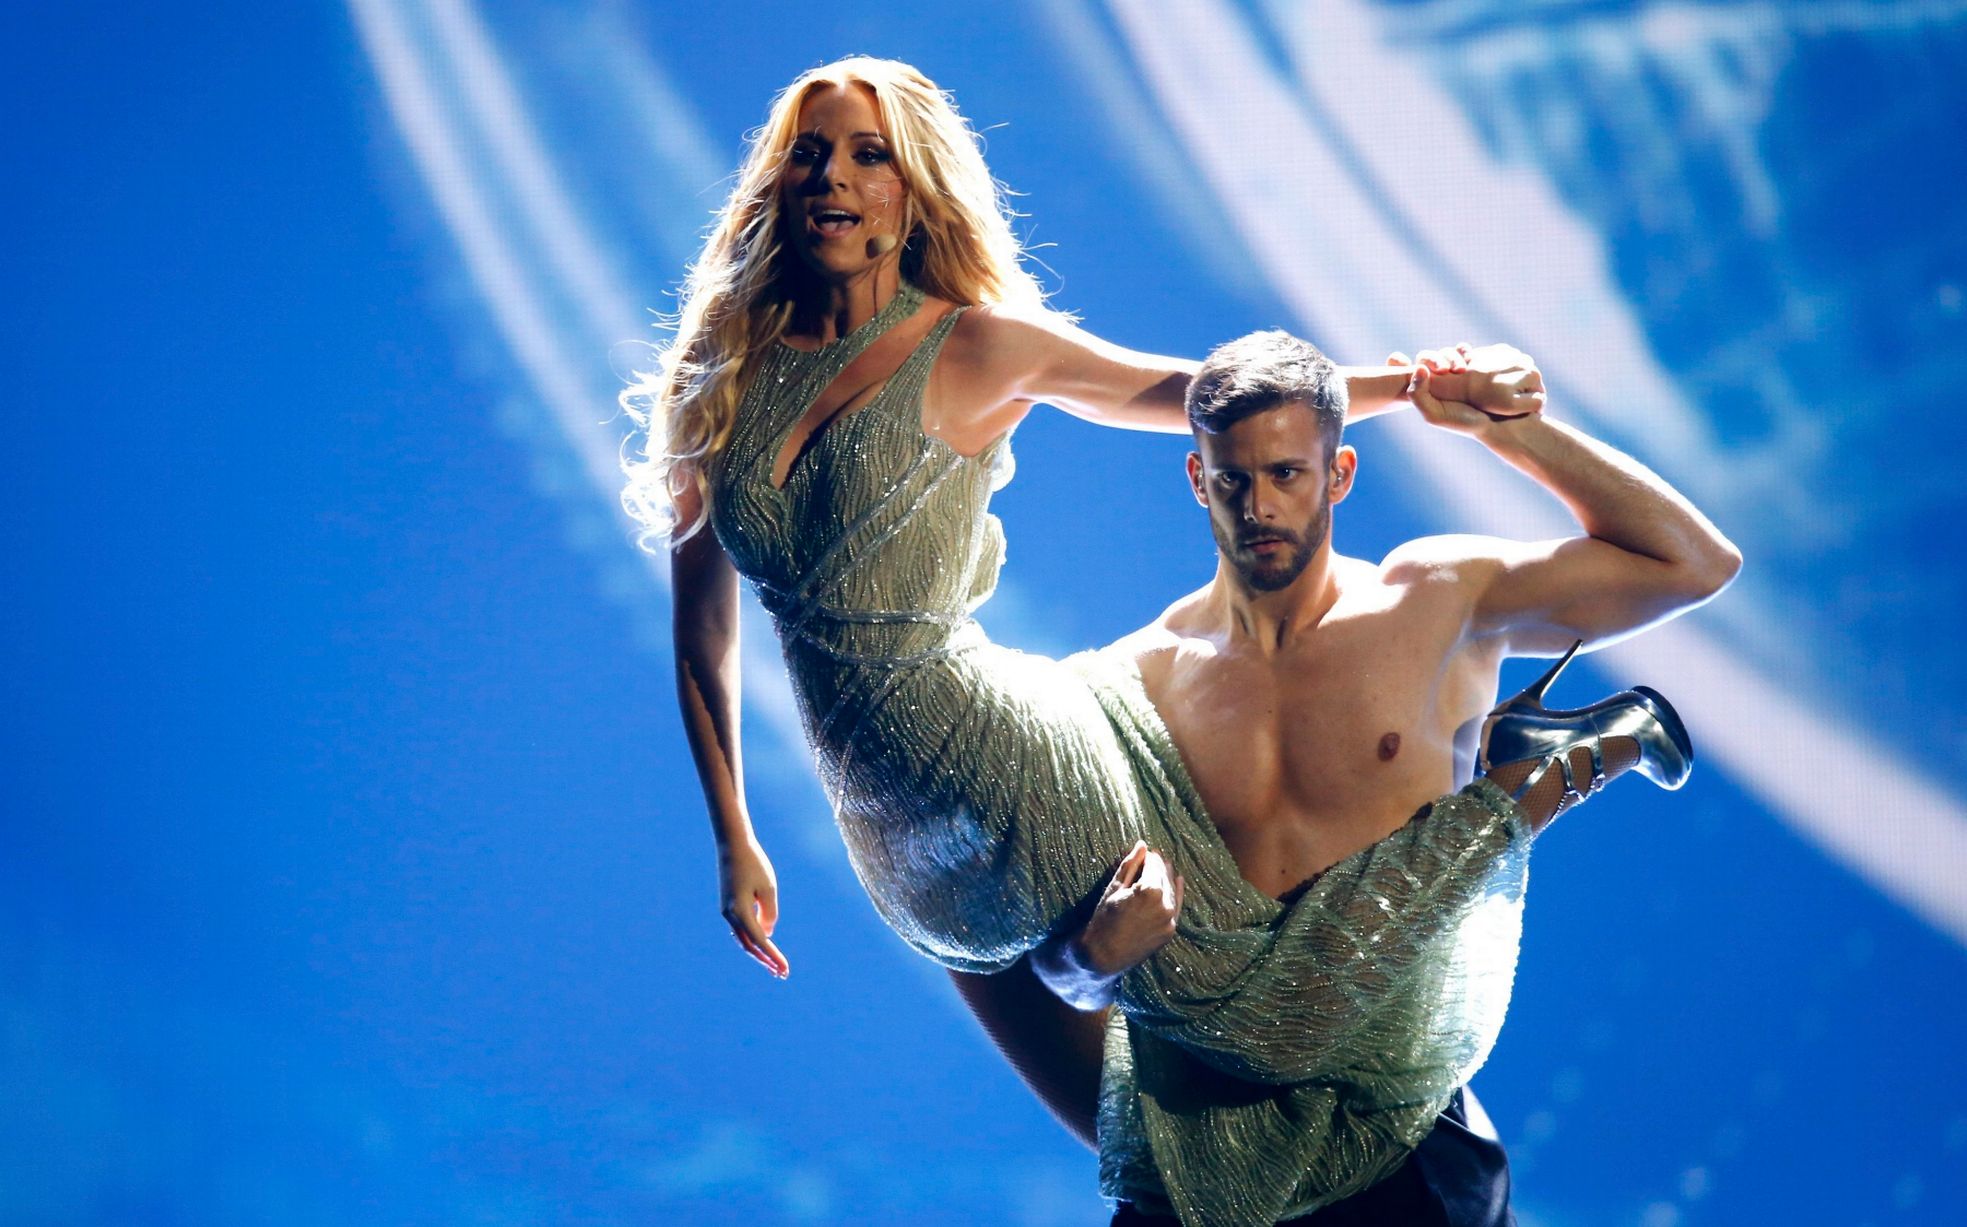 Edurne-from-Spain-performs-on-stage-at-the-Eurovision-Song-Contest-2015